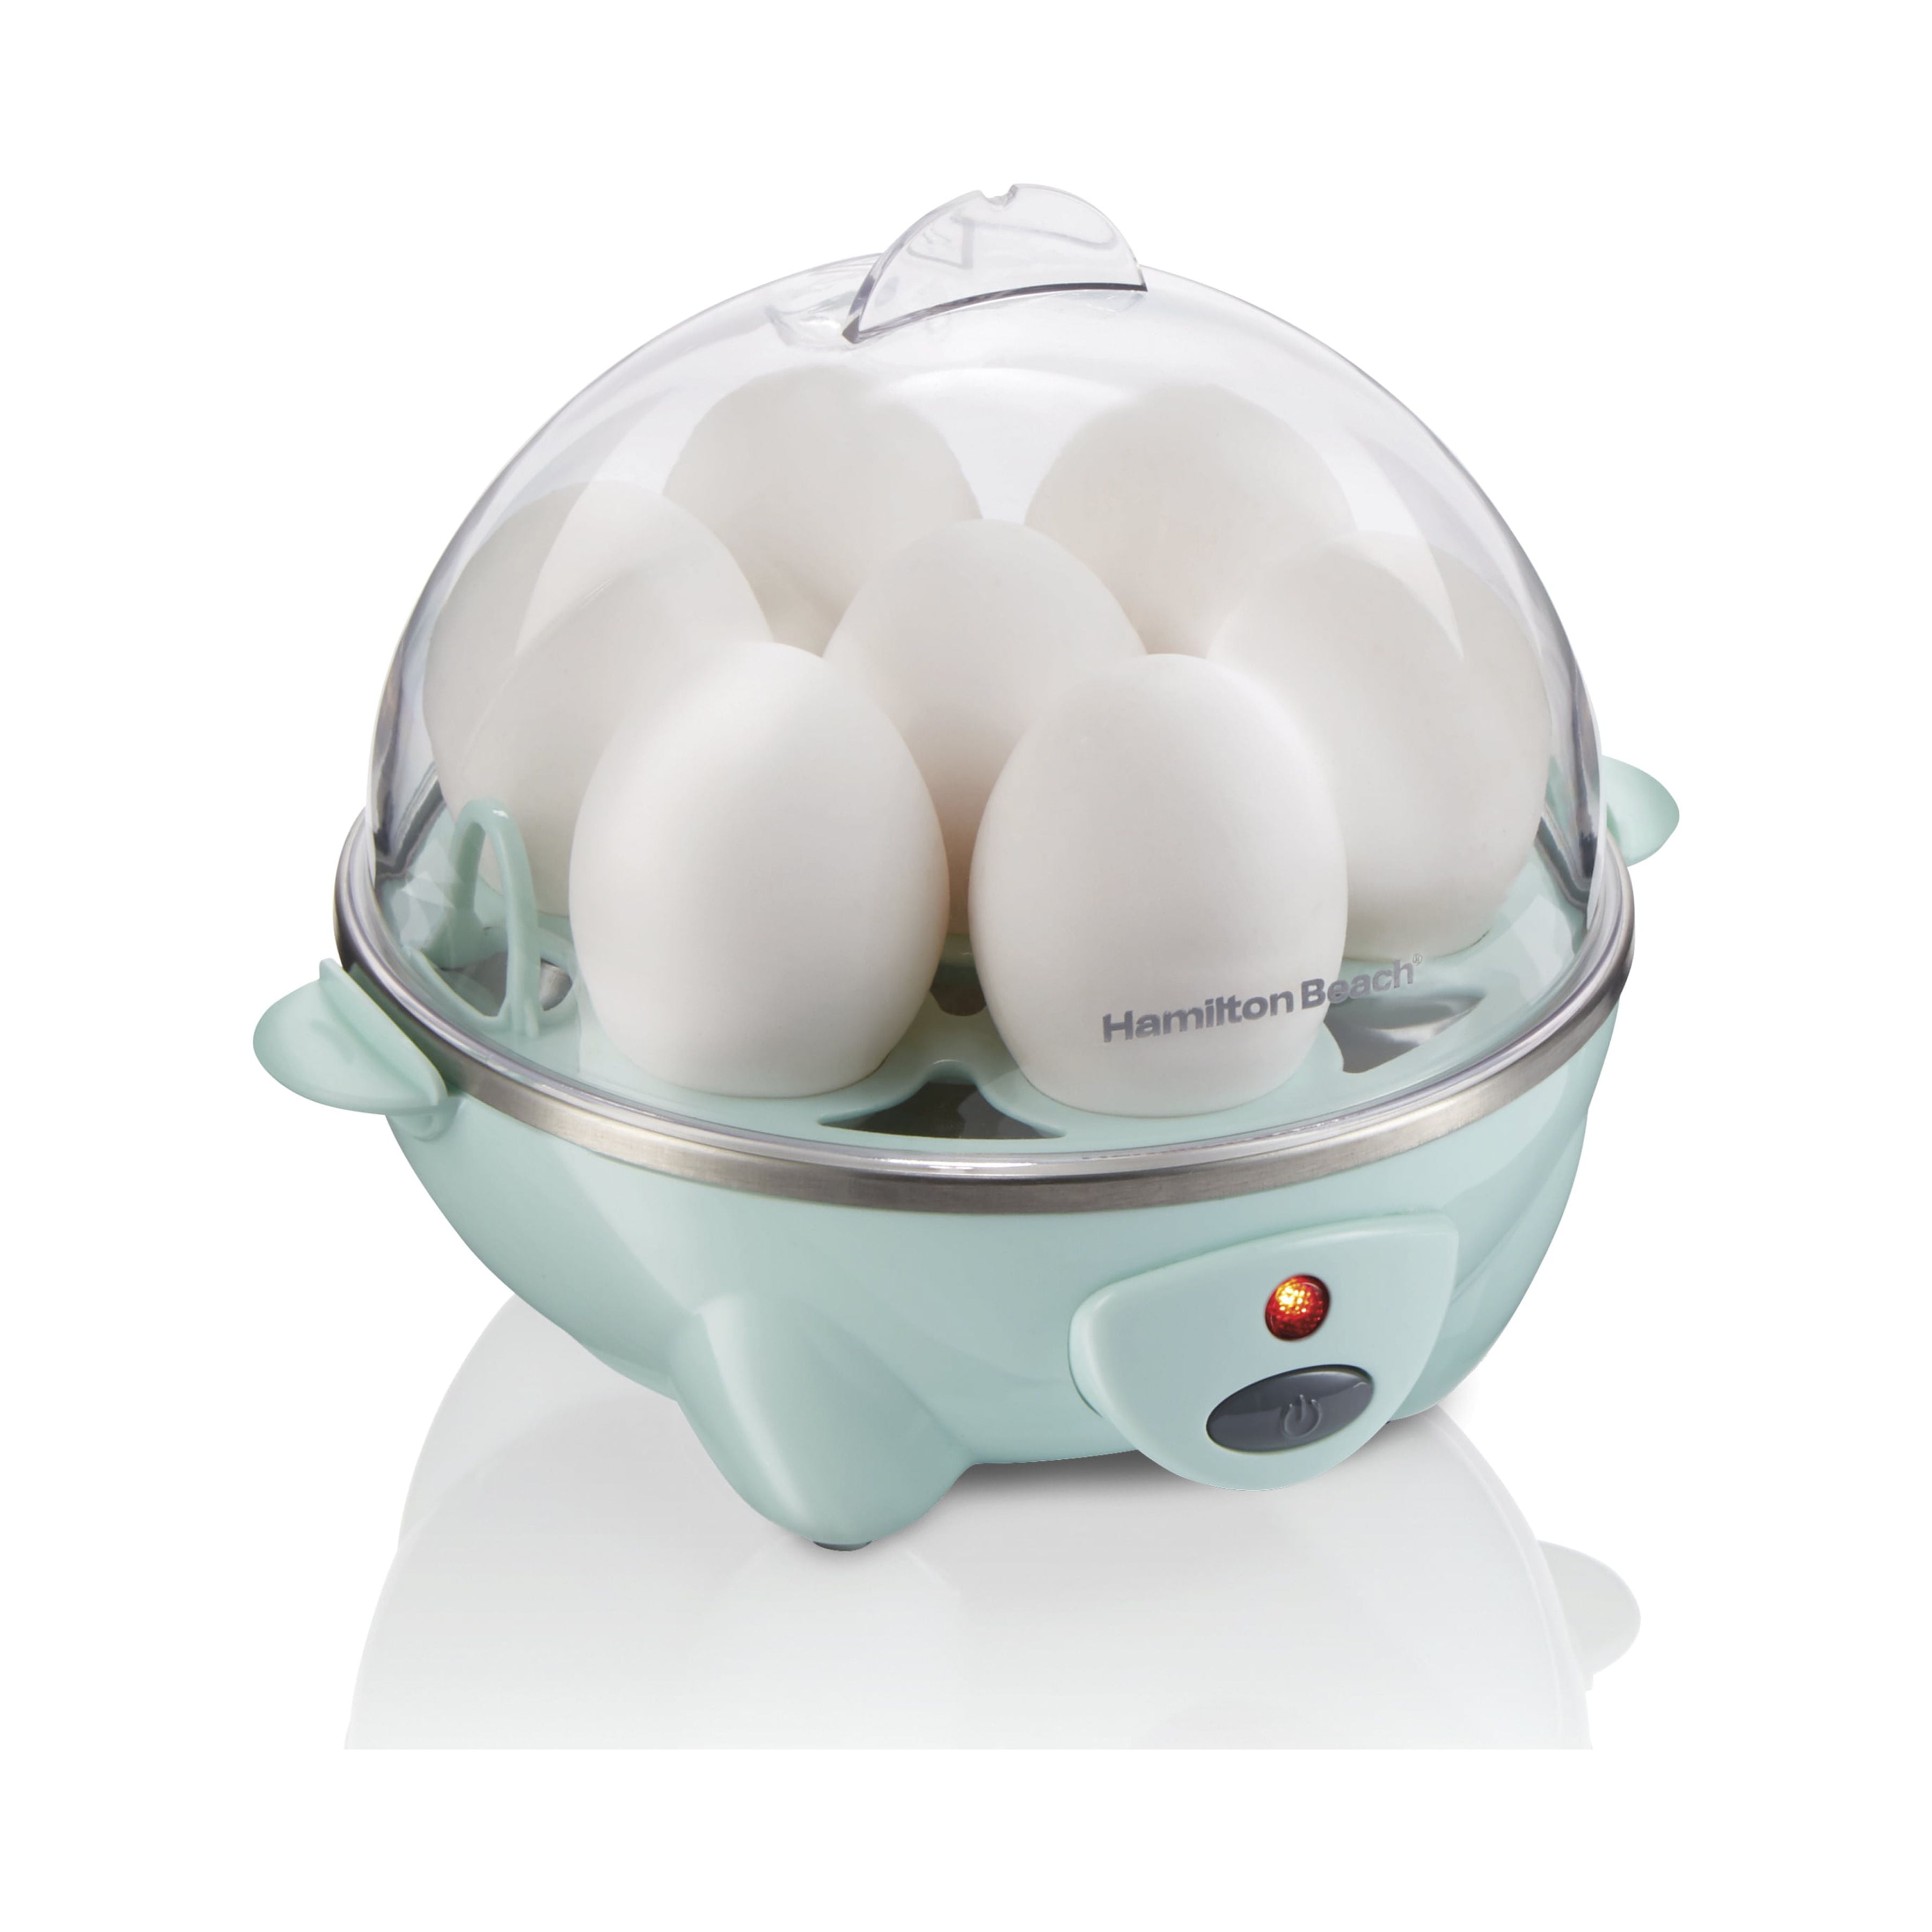 Hamilton Beach 3-in-1 Egg Cooker, Hard-Boiled, Poached, Omelets